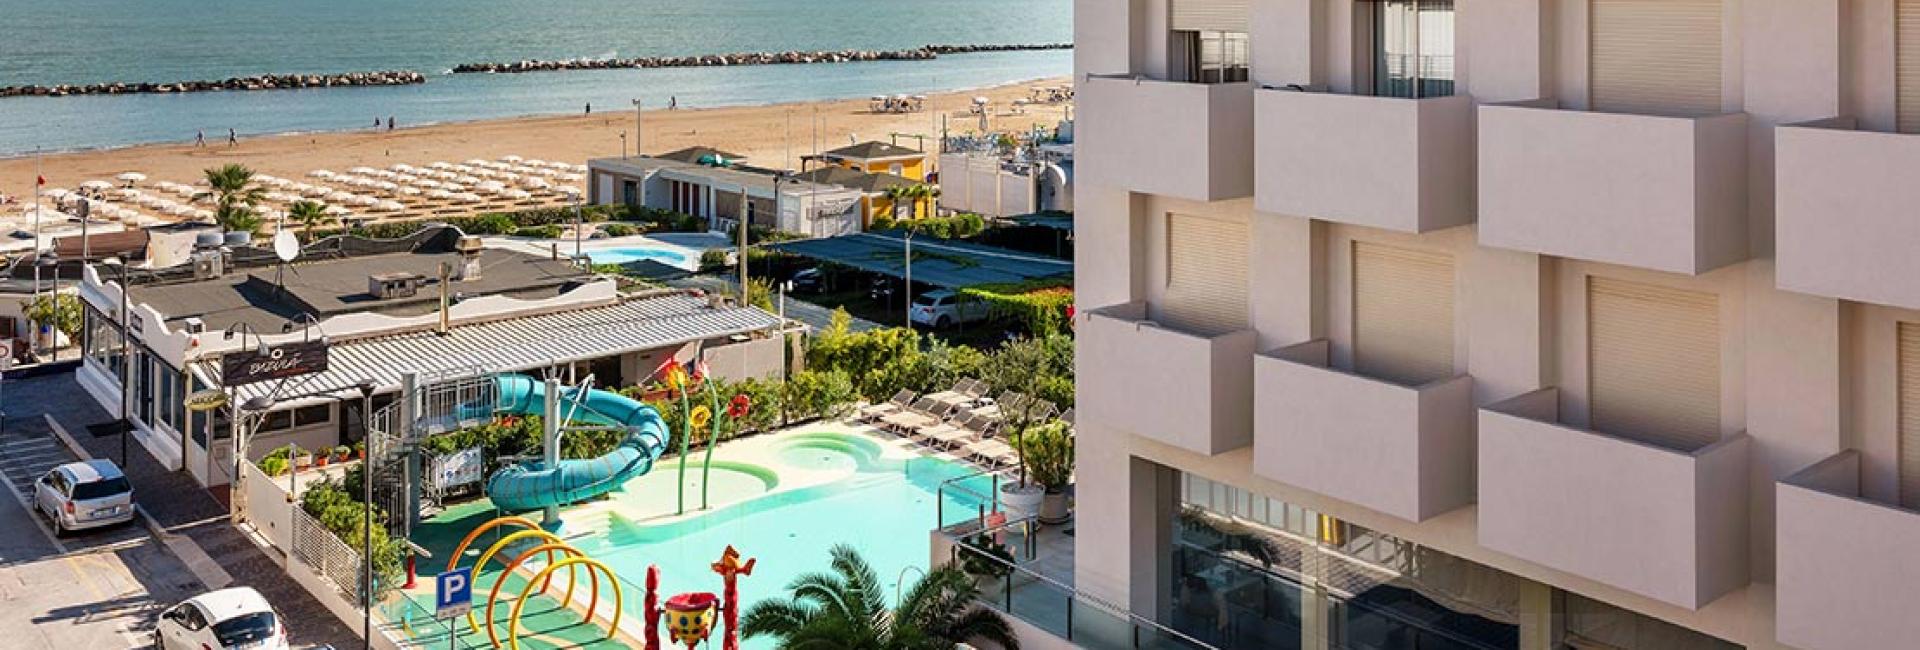 cattolicafamilyresort en late-august-in-cattolica-offer 010